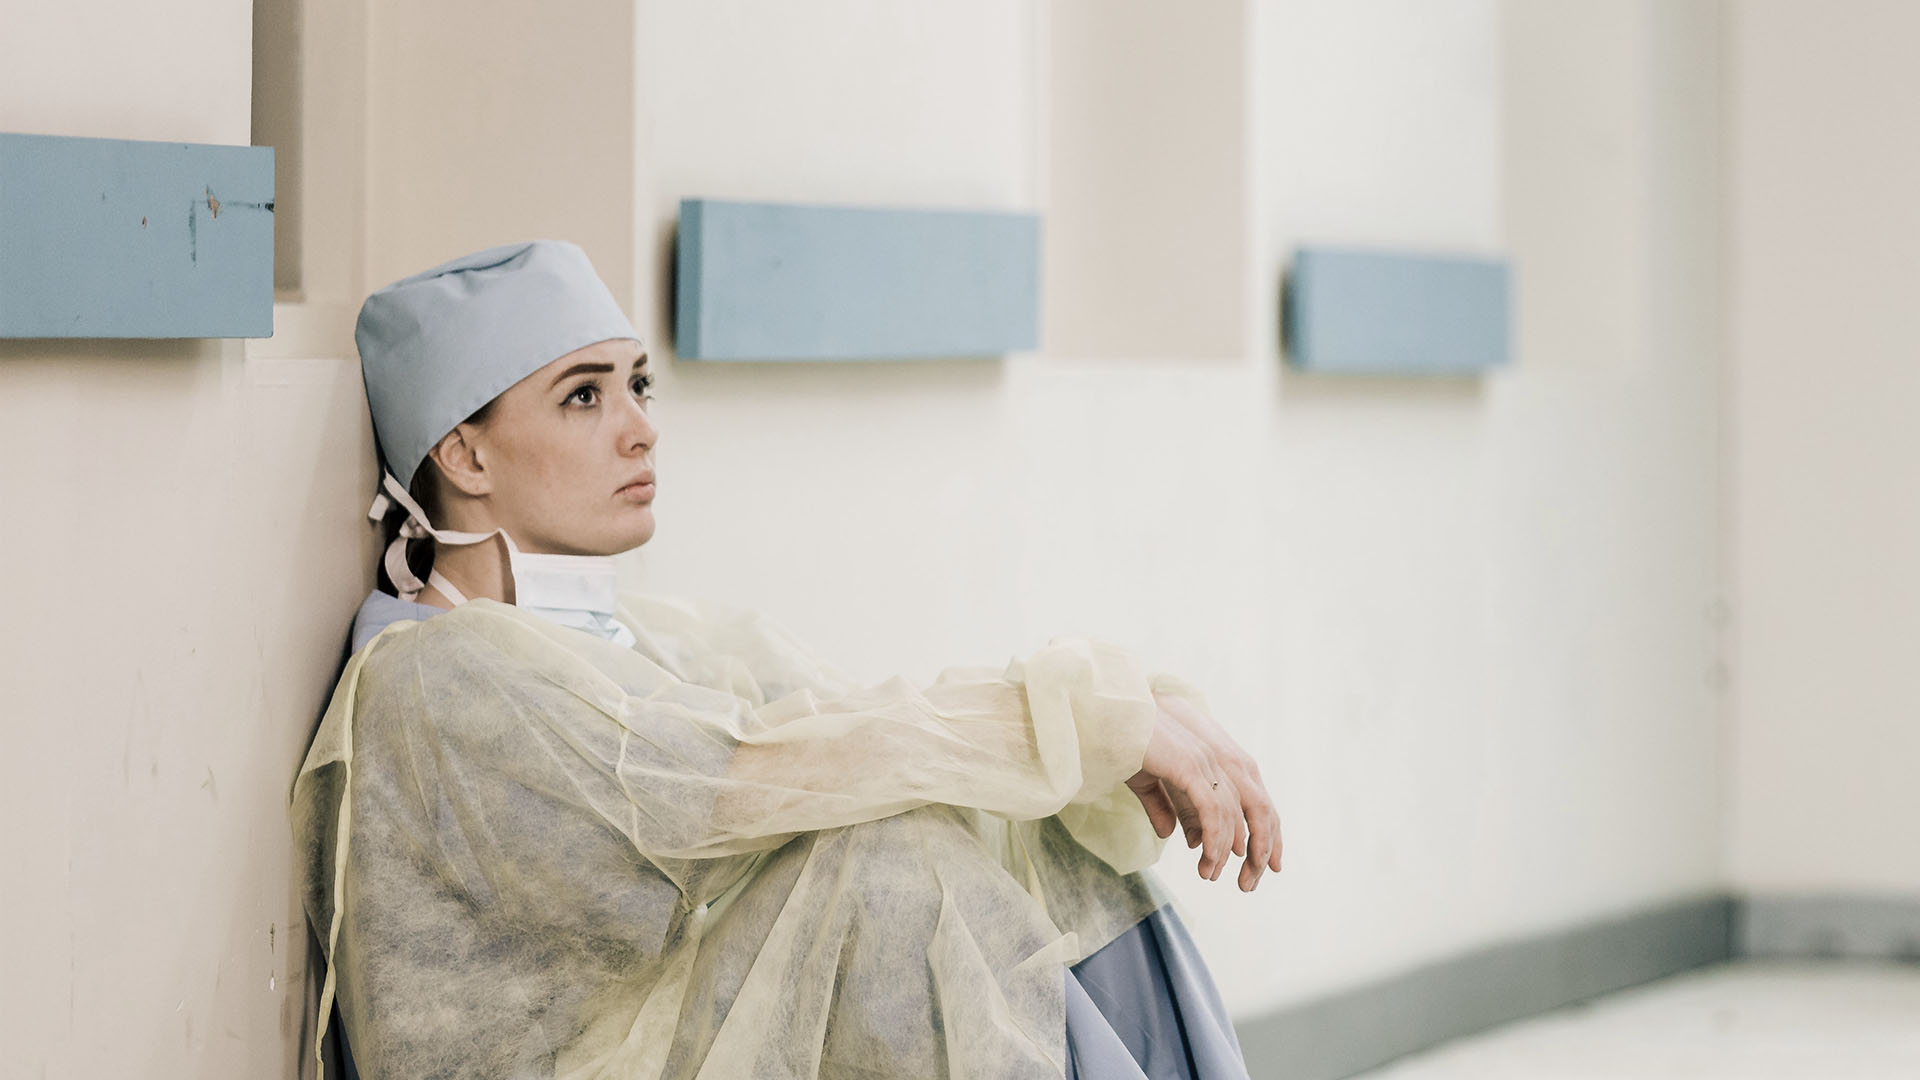 A doctor sitting against a wall, wearing surgical gown and ppe.